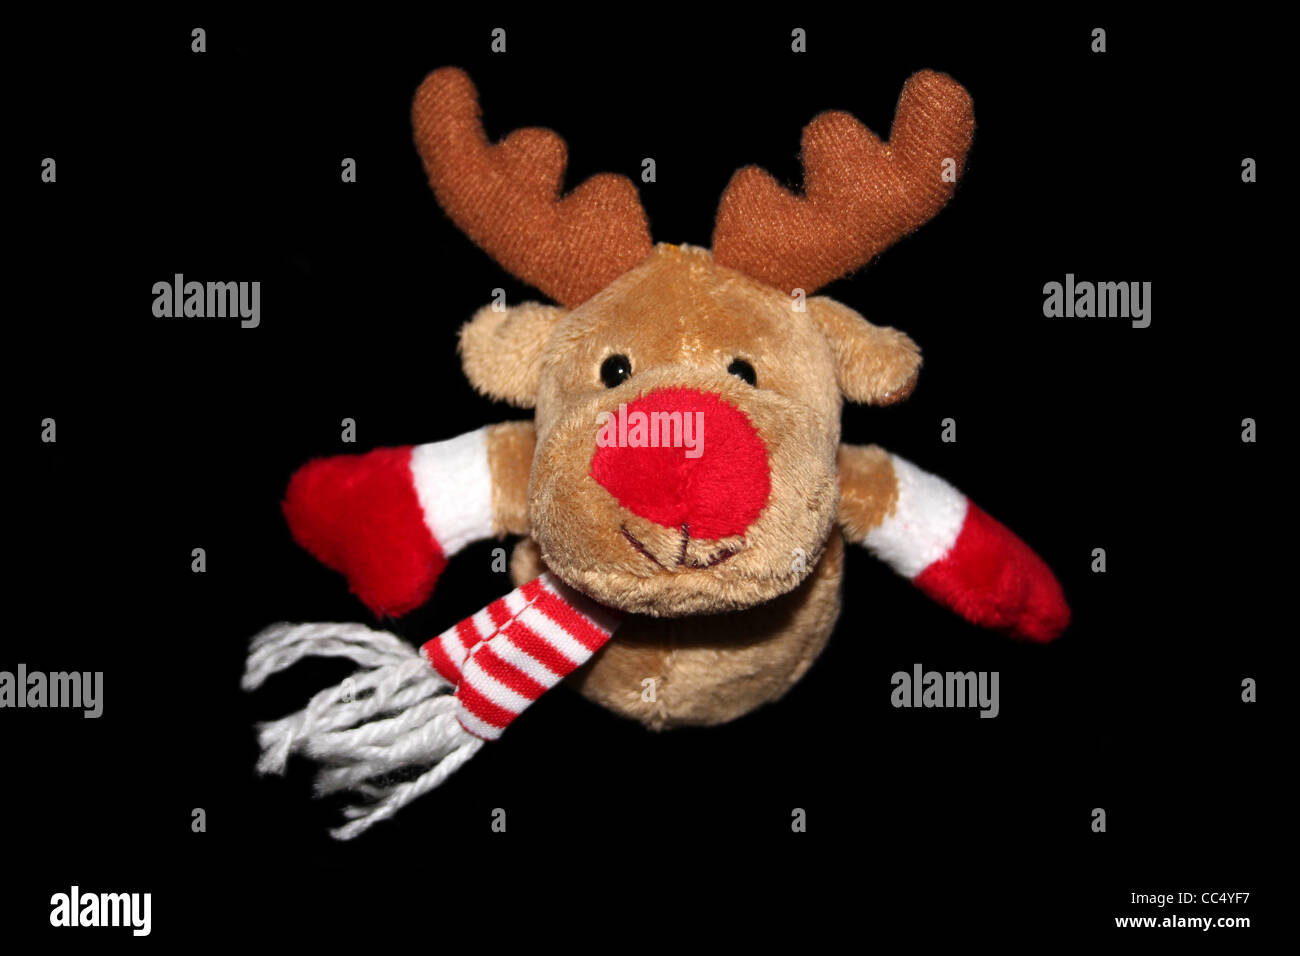 Rudolph The Reindeer Soft Toy Stock Photo